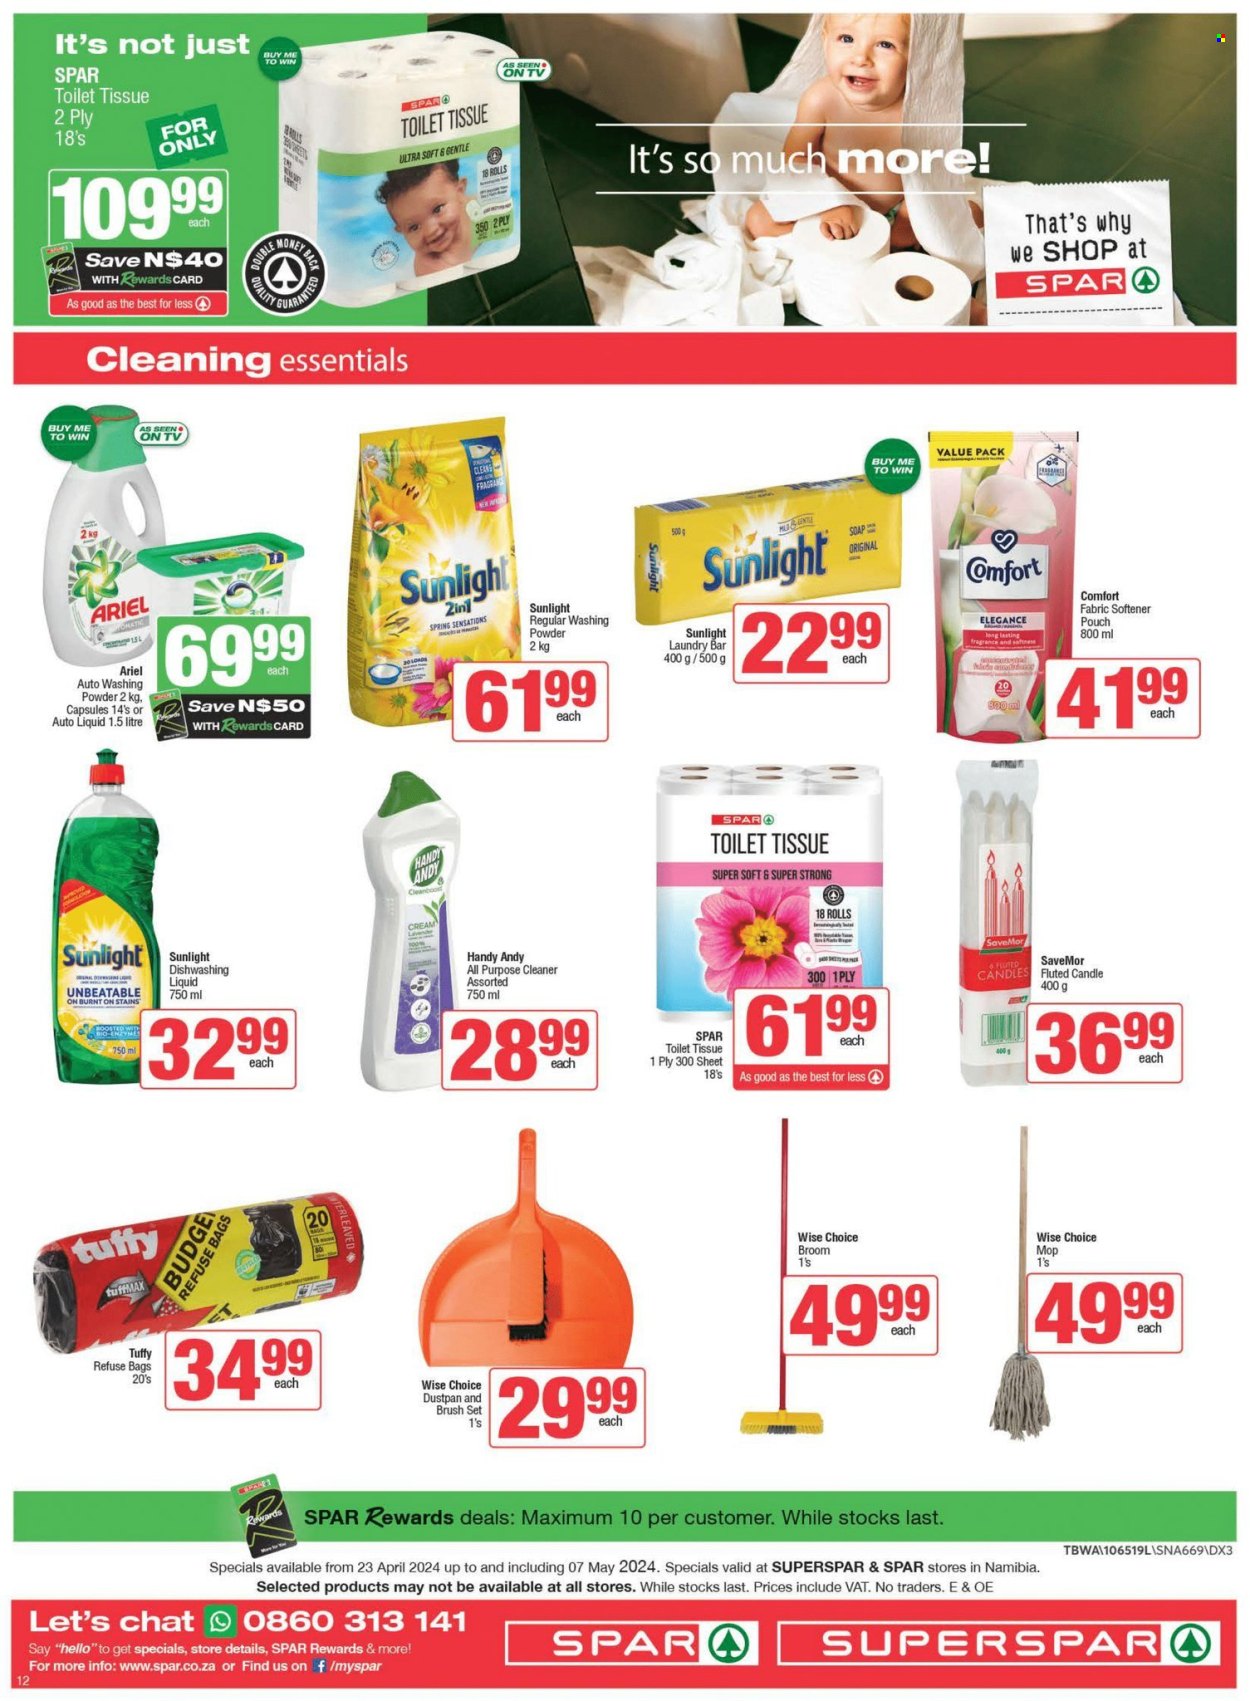 thumbnail - SPAR catalogue  - 23/04/2024 - 07/05/2024 - Sales products - toilet paper, all purpose cleaner, cleaner, fabric softener, Ariel, laundry powder, laundry soap bar, Sunlight, Comfort softener, dishwashing liquid, refuse bag. Page 12.